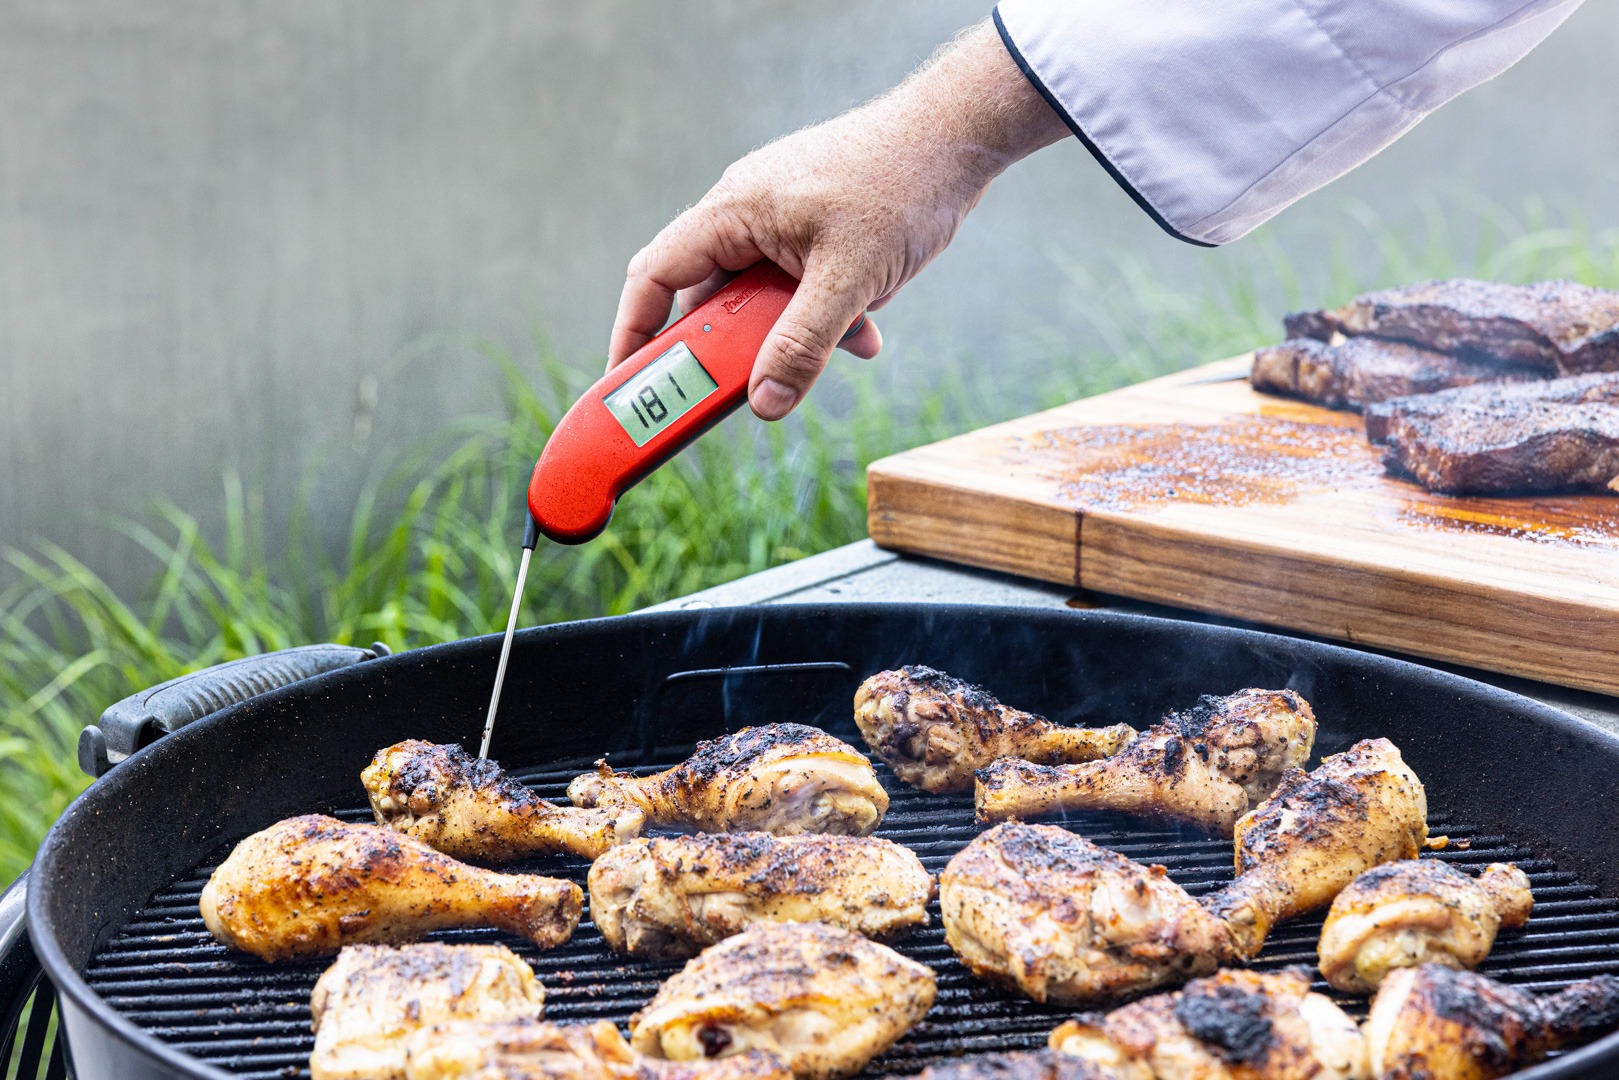 Temping grilling chicken